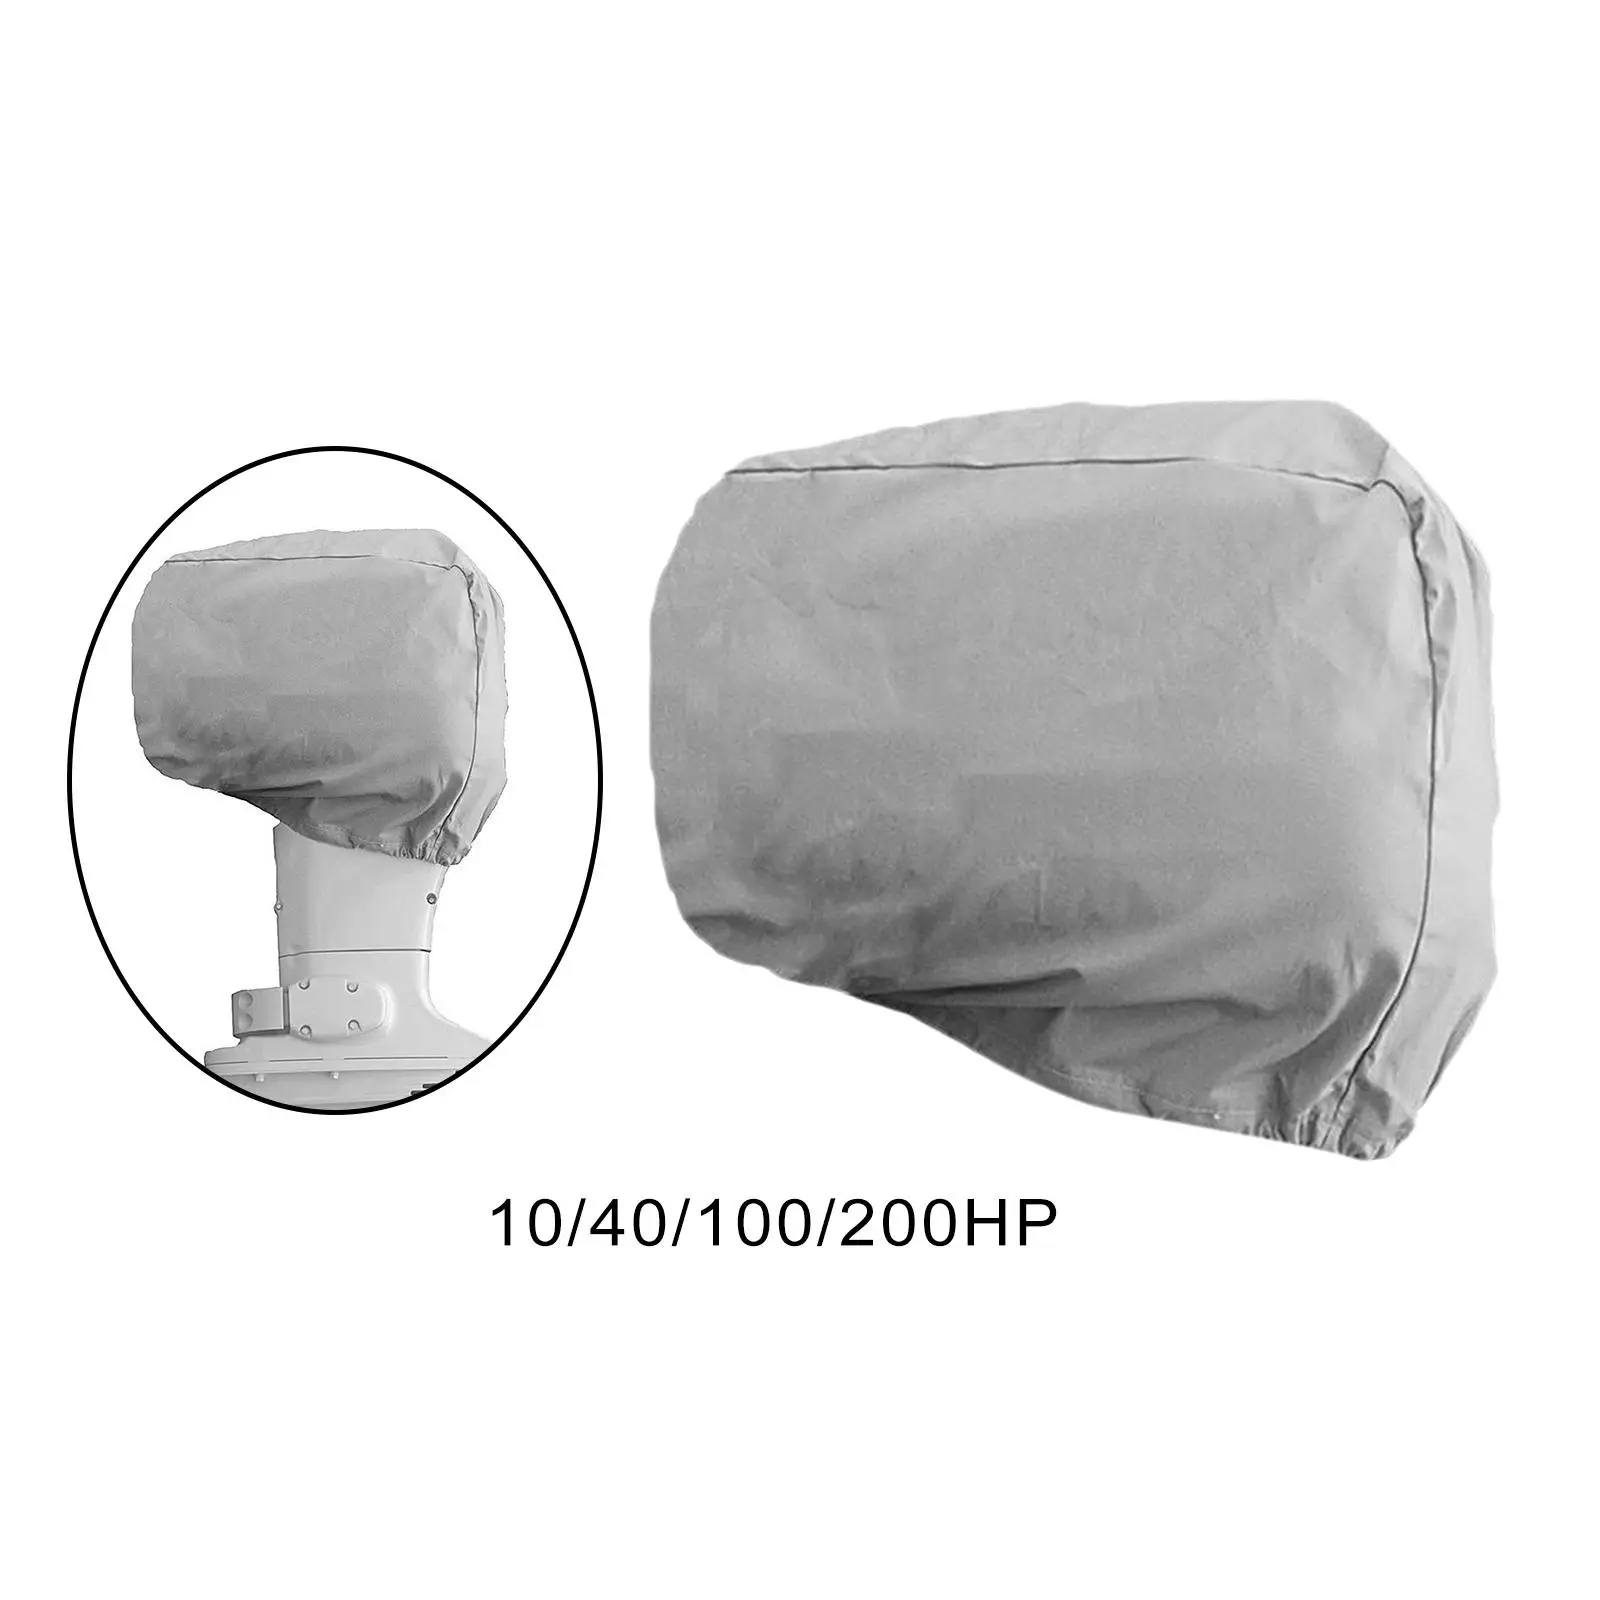 Boat Hood Covers Adjustable Protective Oxford Anti Scratch Outboard Motor Cover for Summer